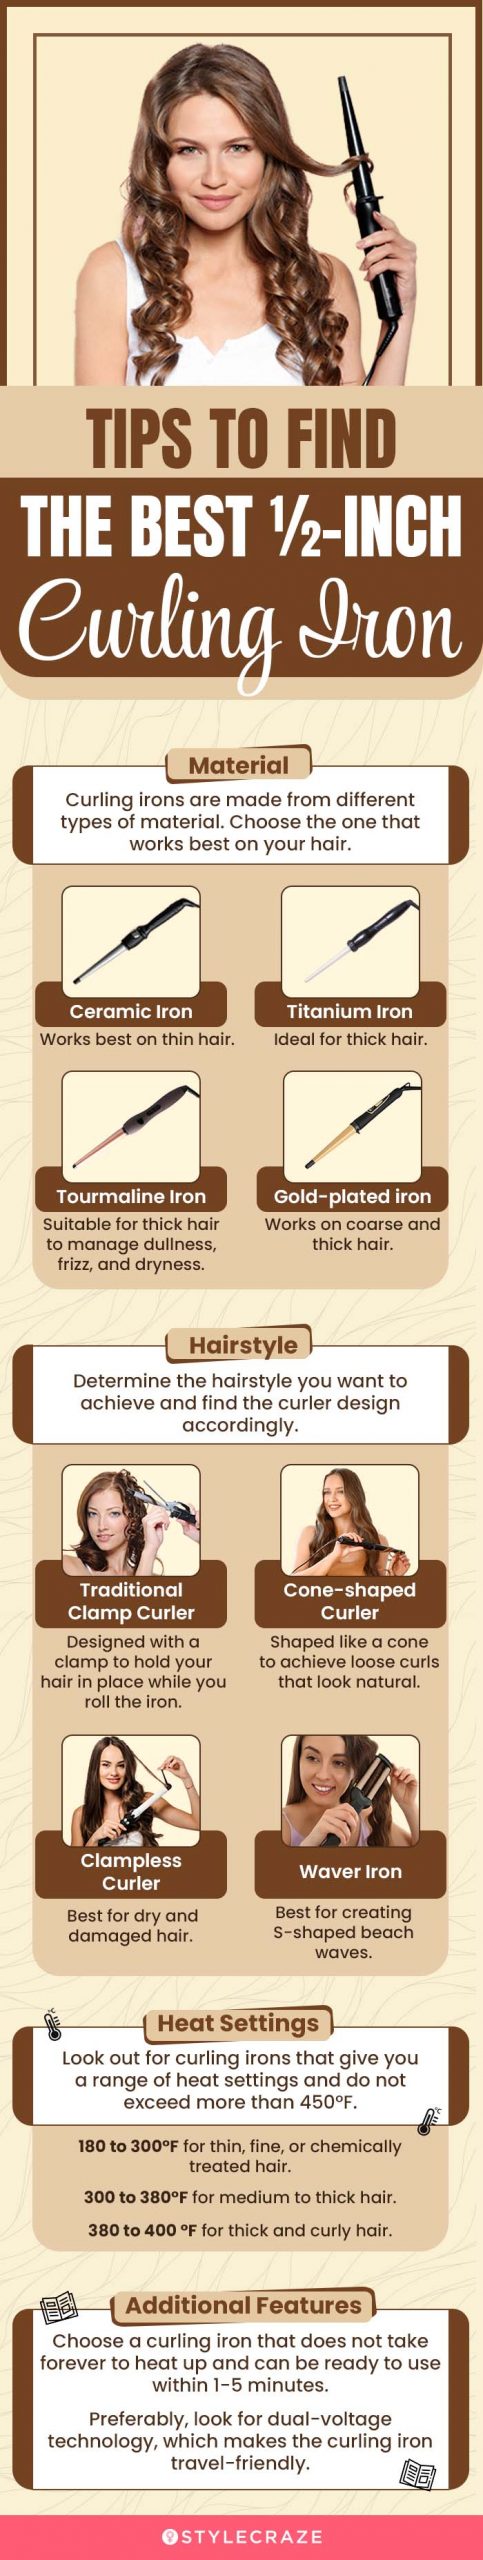 Tips To Find The Best ½-Inch Curling Iron